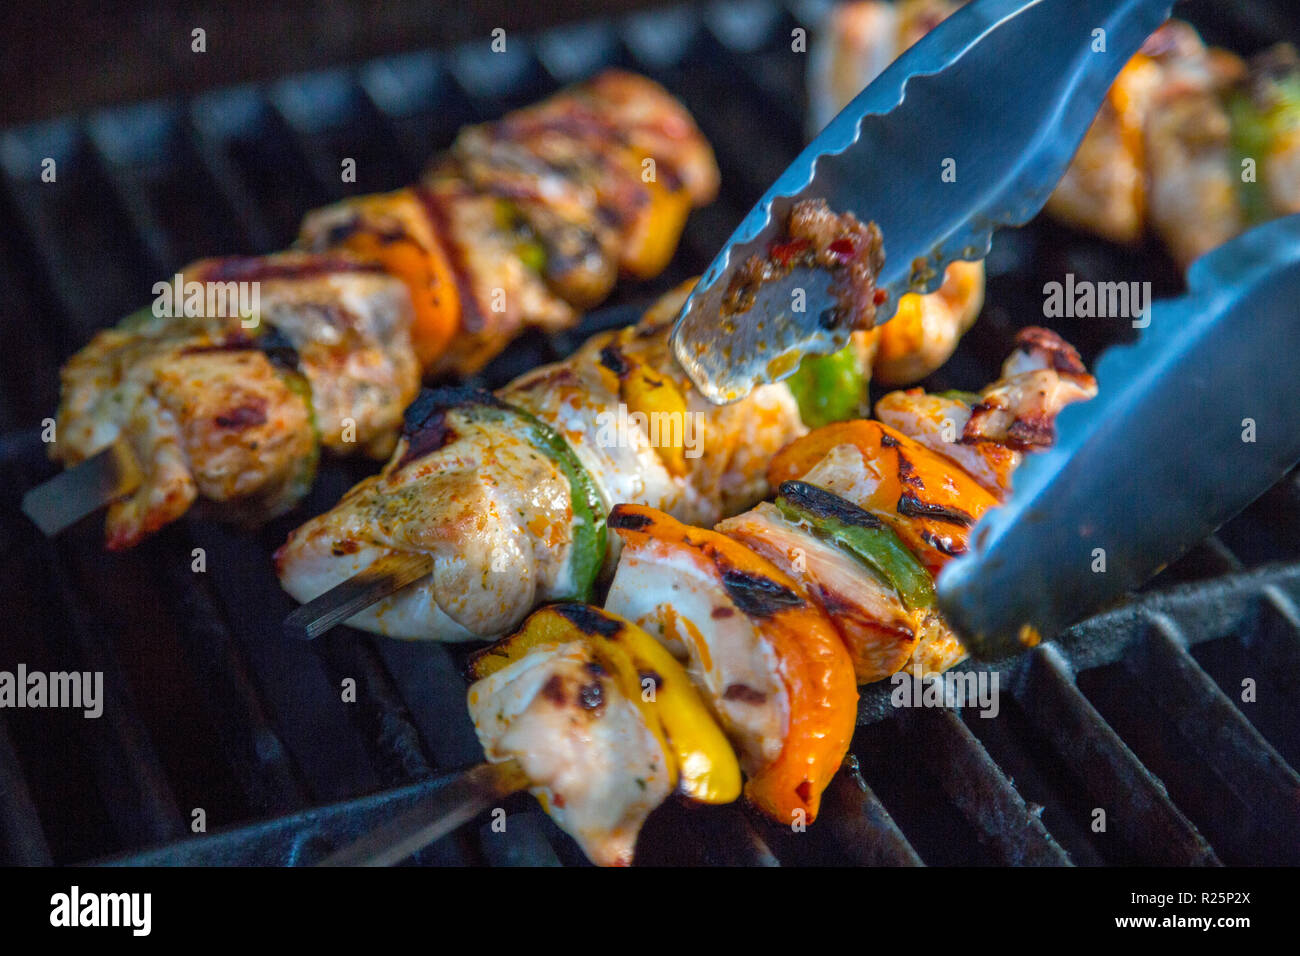 Meat and vegetables skewers on a grill, poultry meat and pepper pieces on a skewer, are grilled, Stock Photo